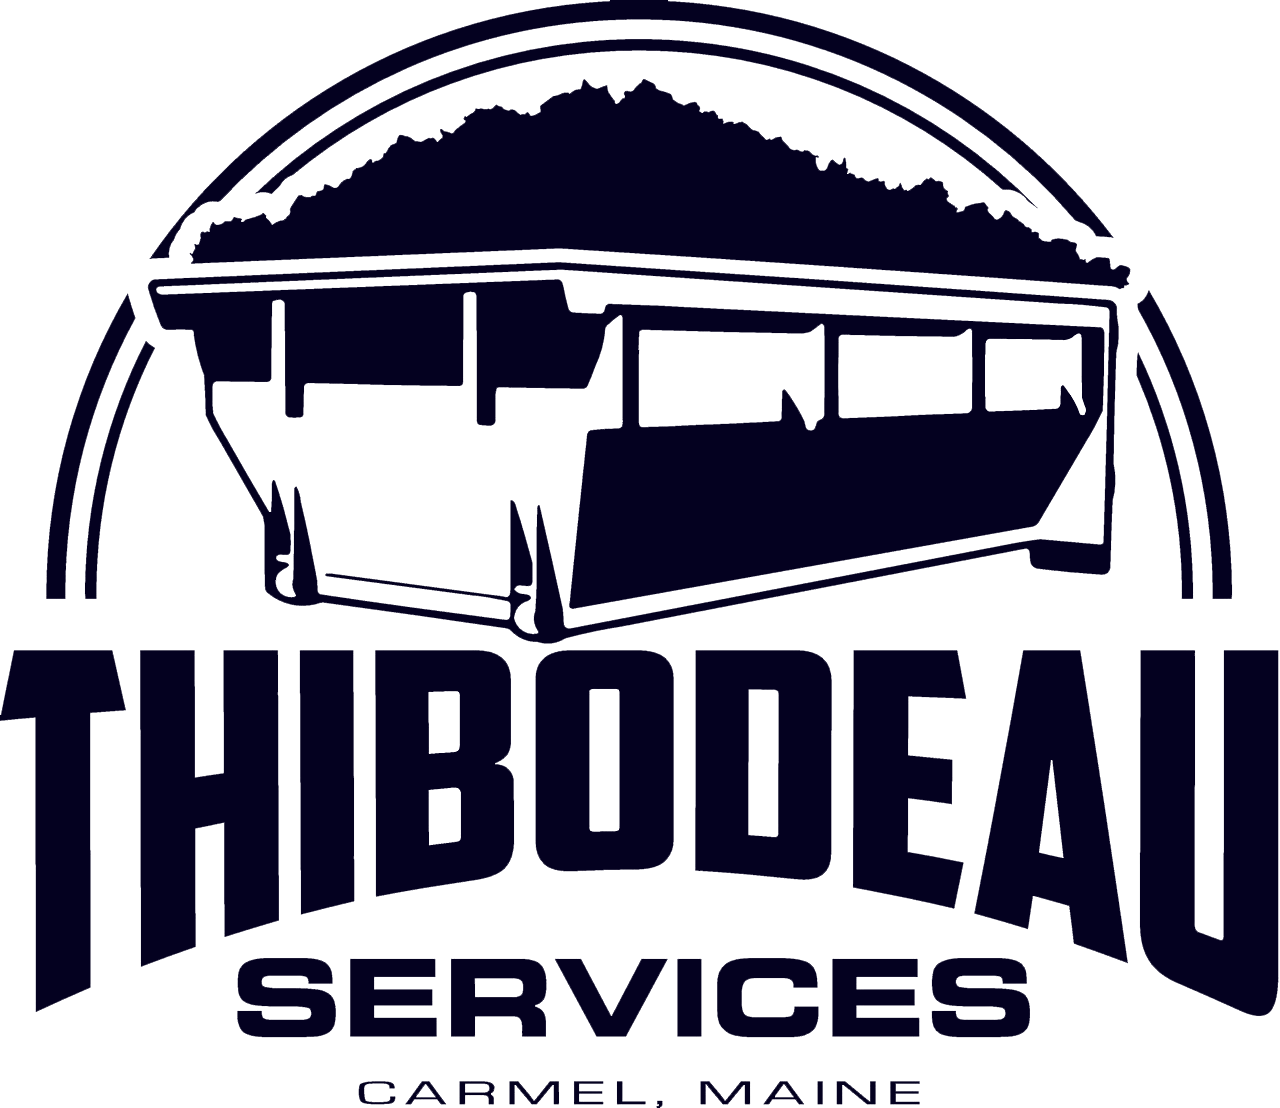 #1 junk removal and dumspter rental company near me, bangor, central me, thibodeu services